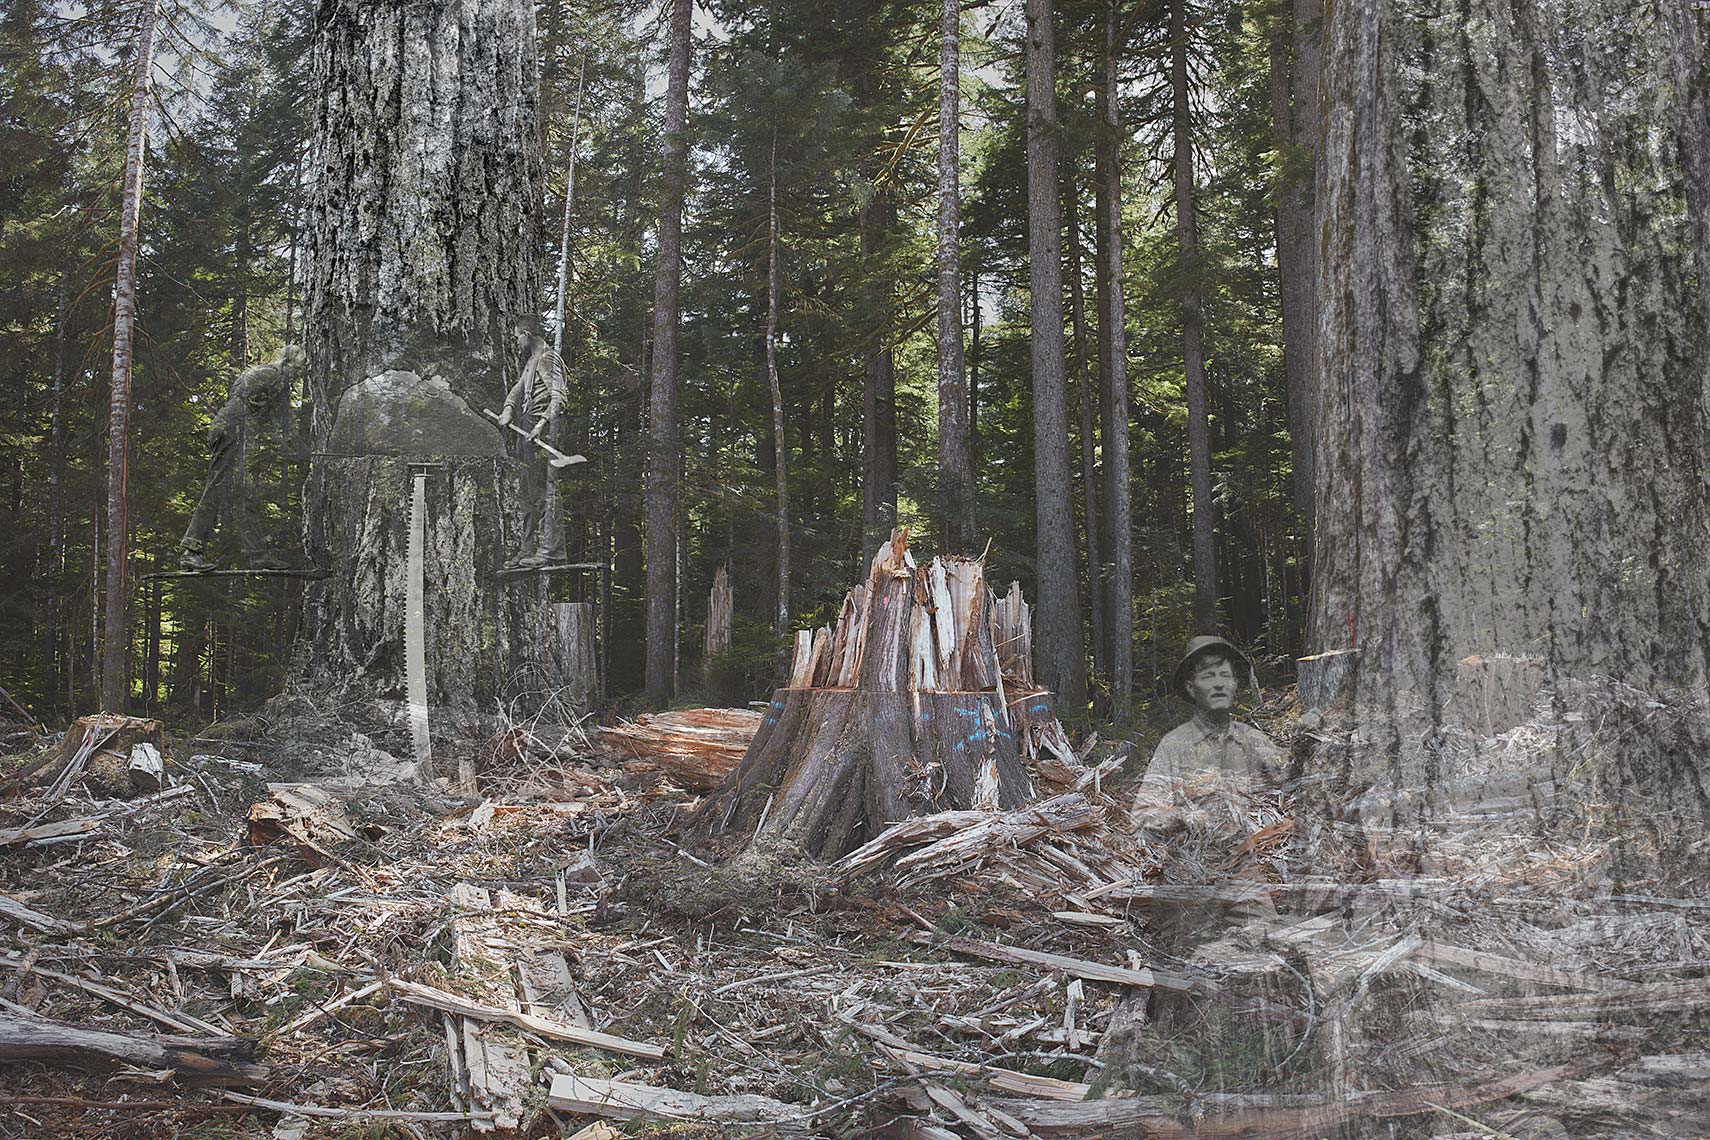  Falling Boundaries - Misery Whips and Double Bits - Environmental  Art Photograph Logging